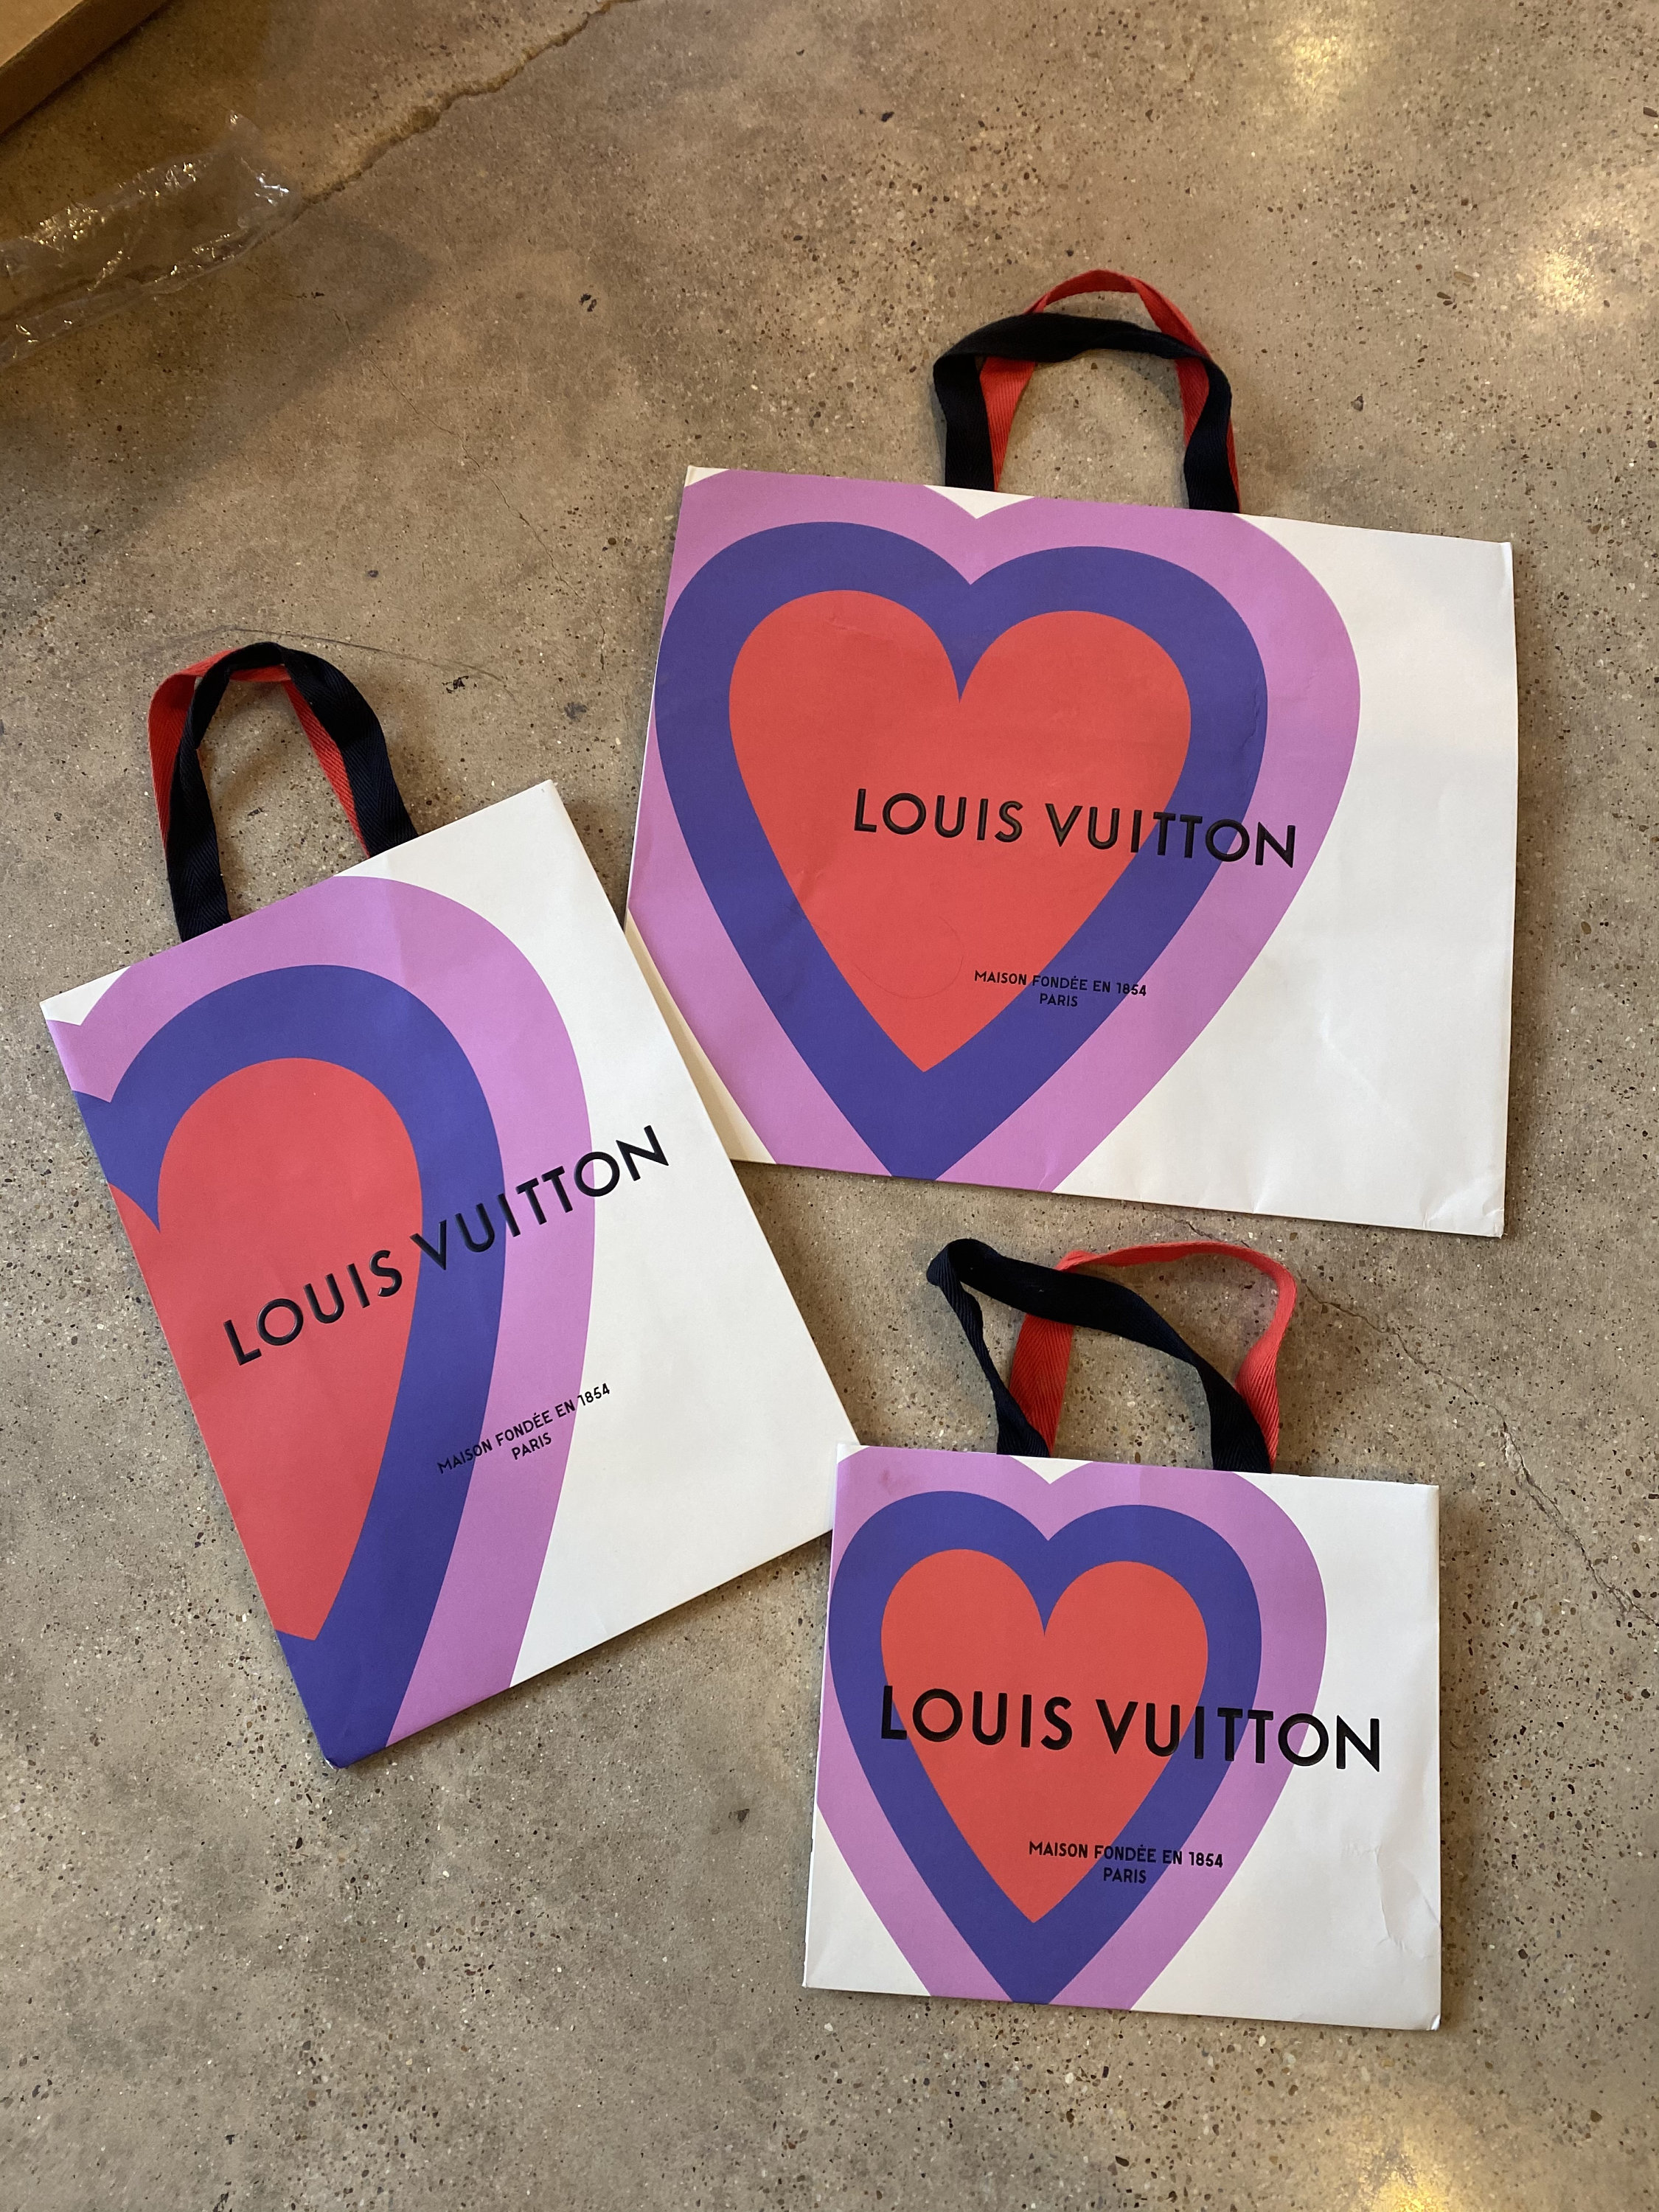 Limited Edition Louis Vuitton Gift Box, Bag, Ribbon, Pouch  Louis vuitton  gifts, Louis vuitton limited edition, Gift box